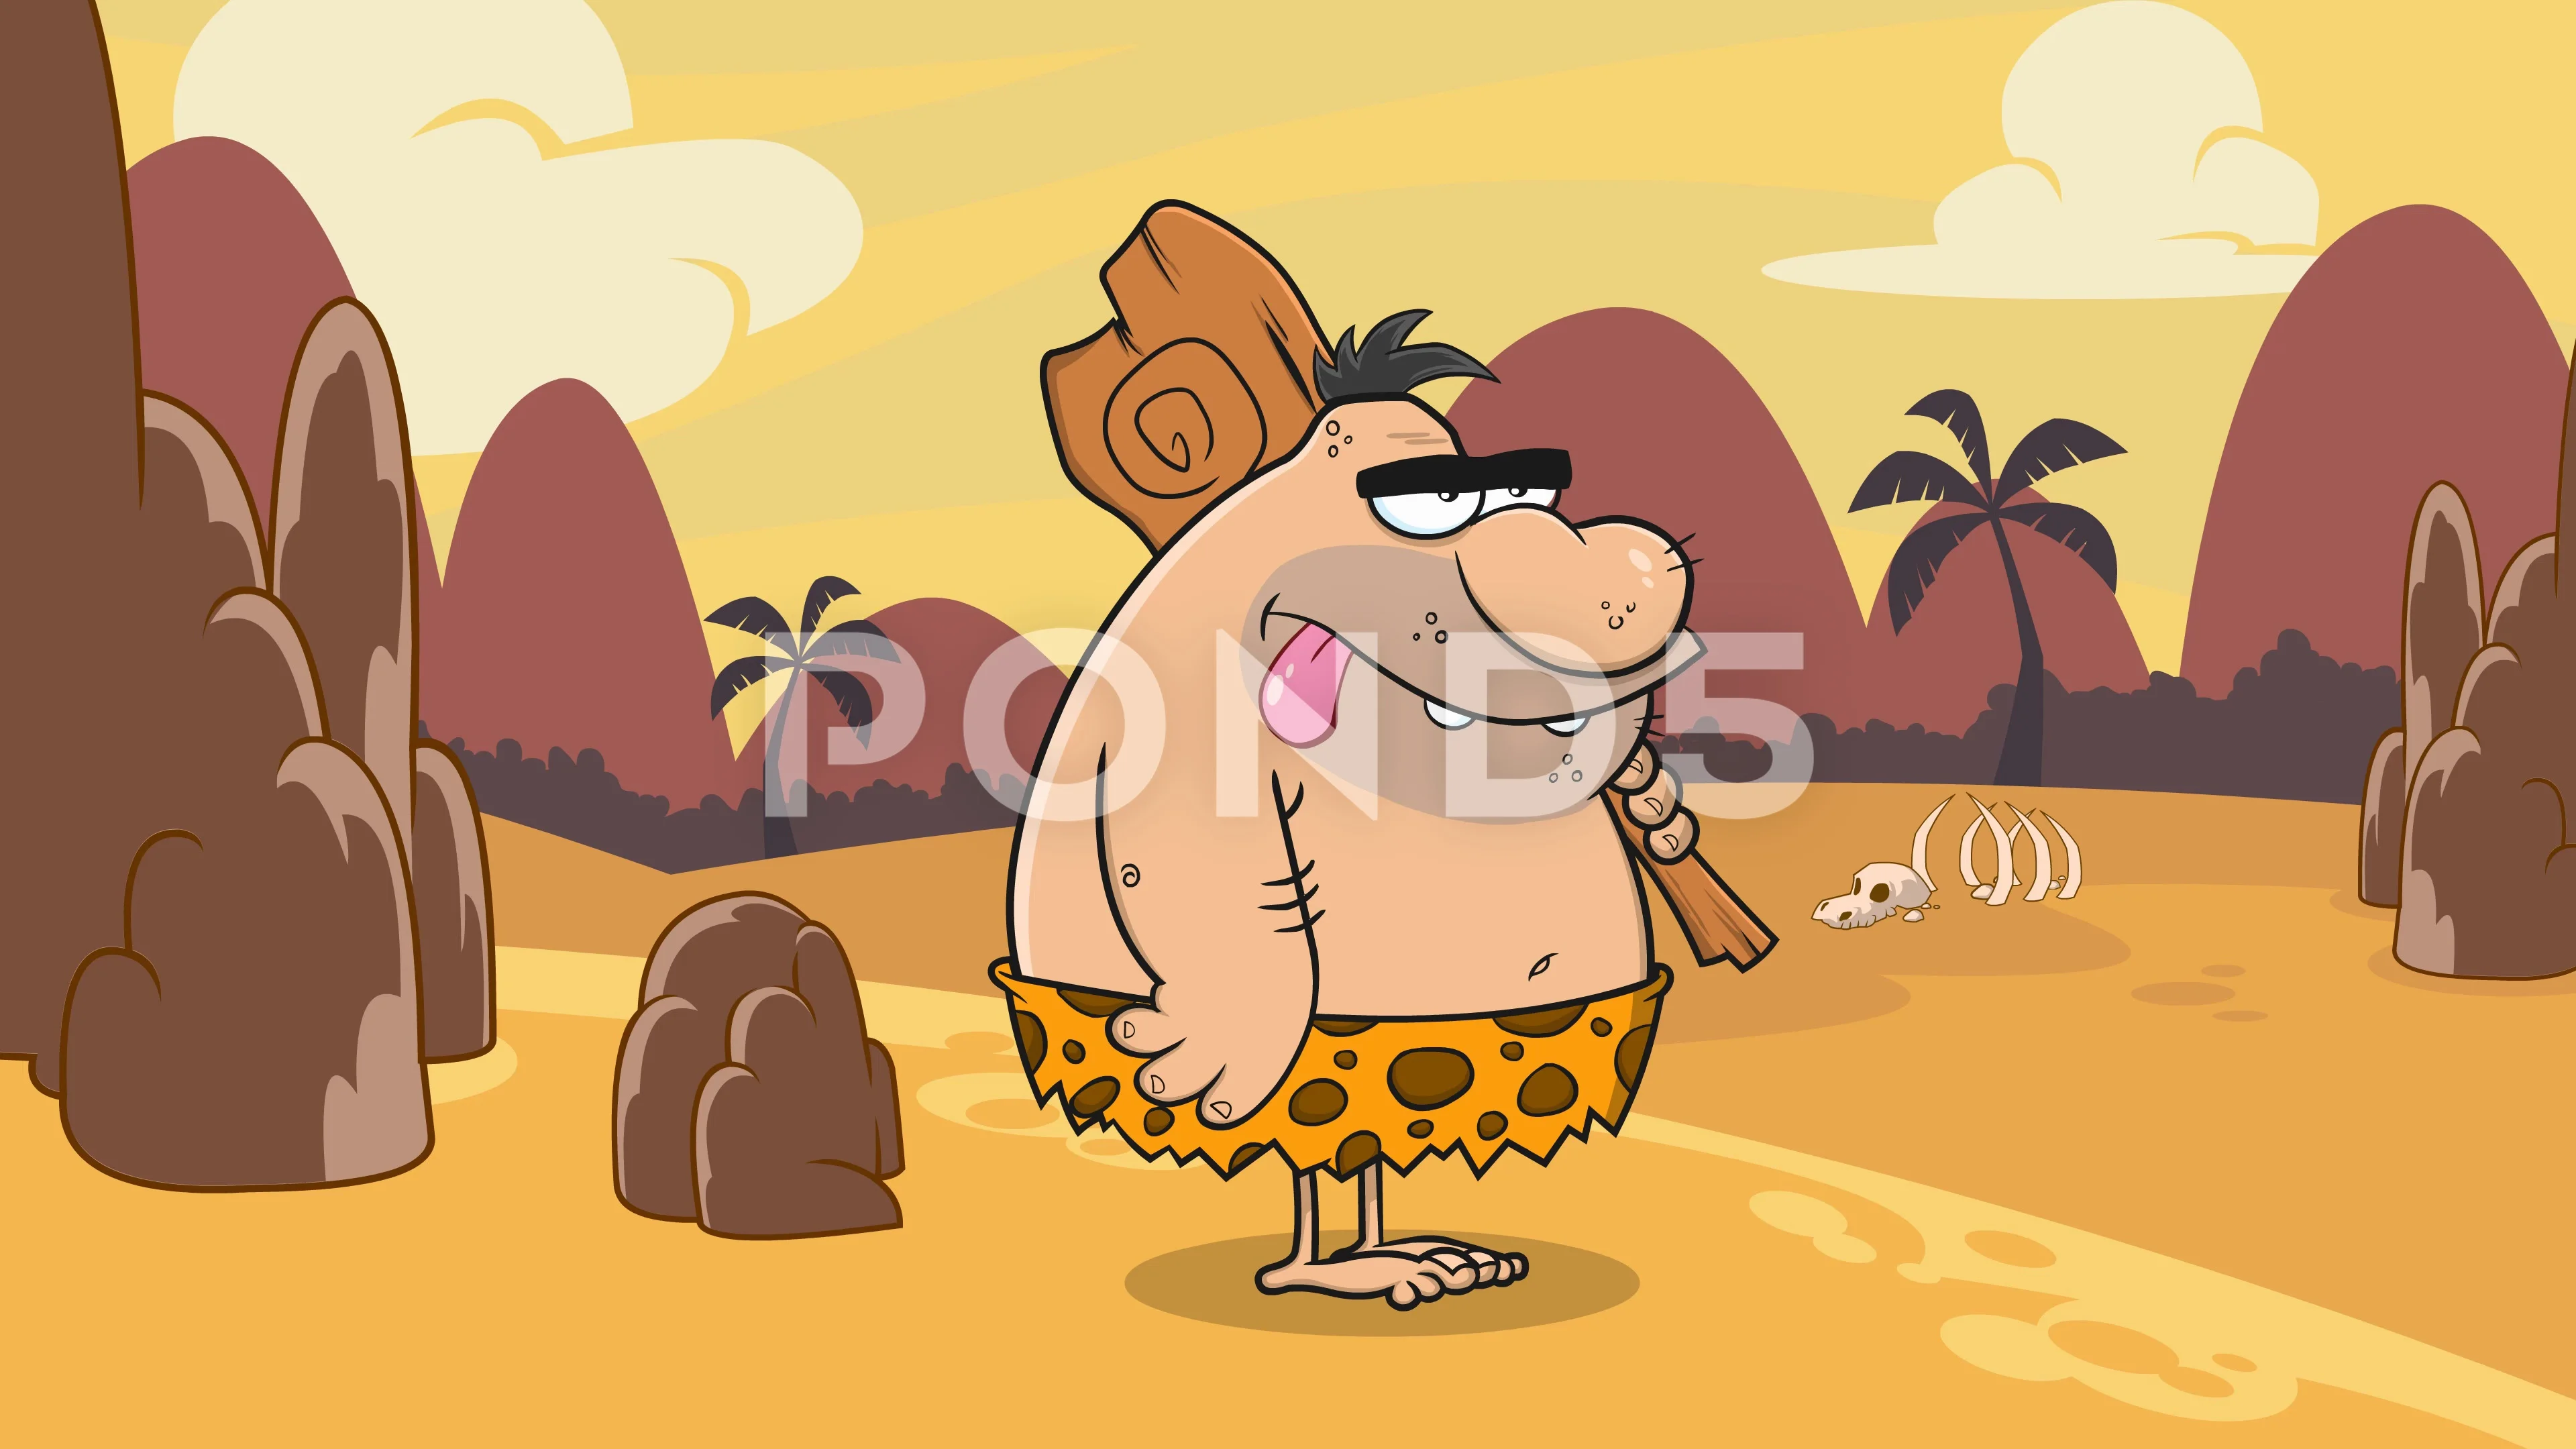 Caveman Cartoon Character With Club | Stock Video | Pond5